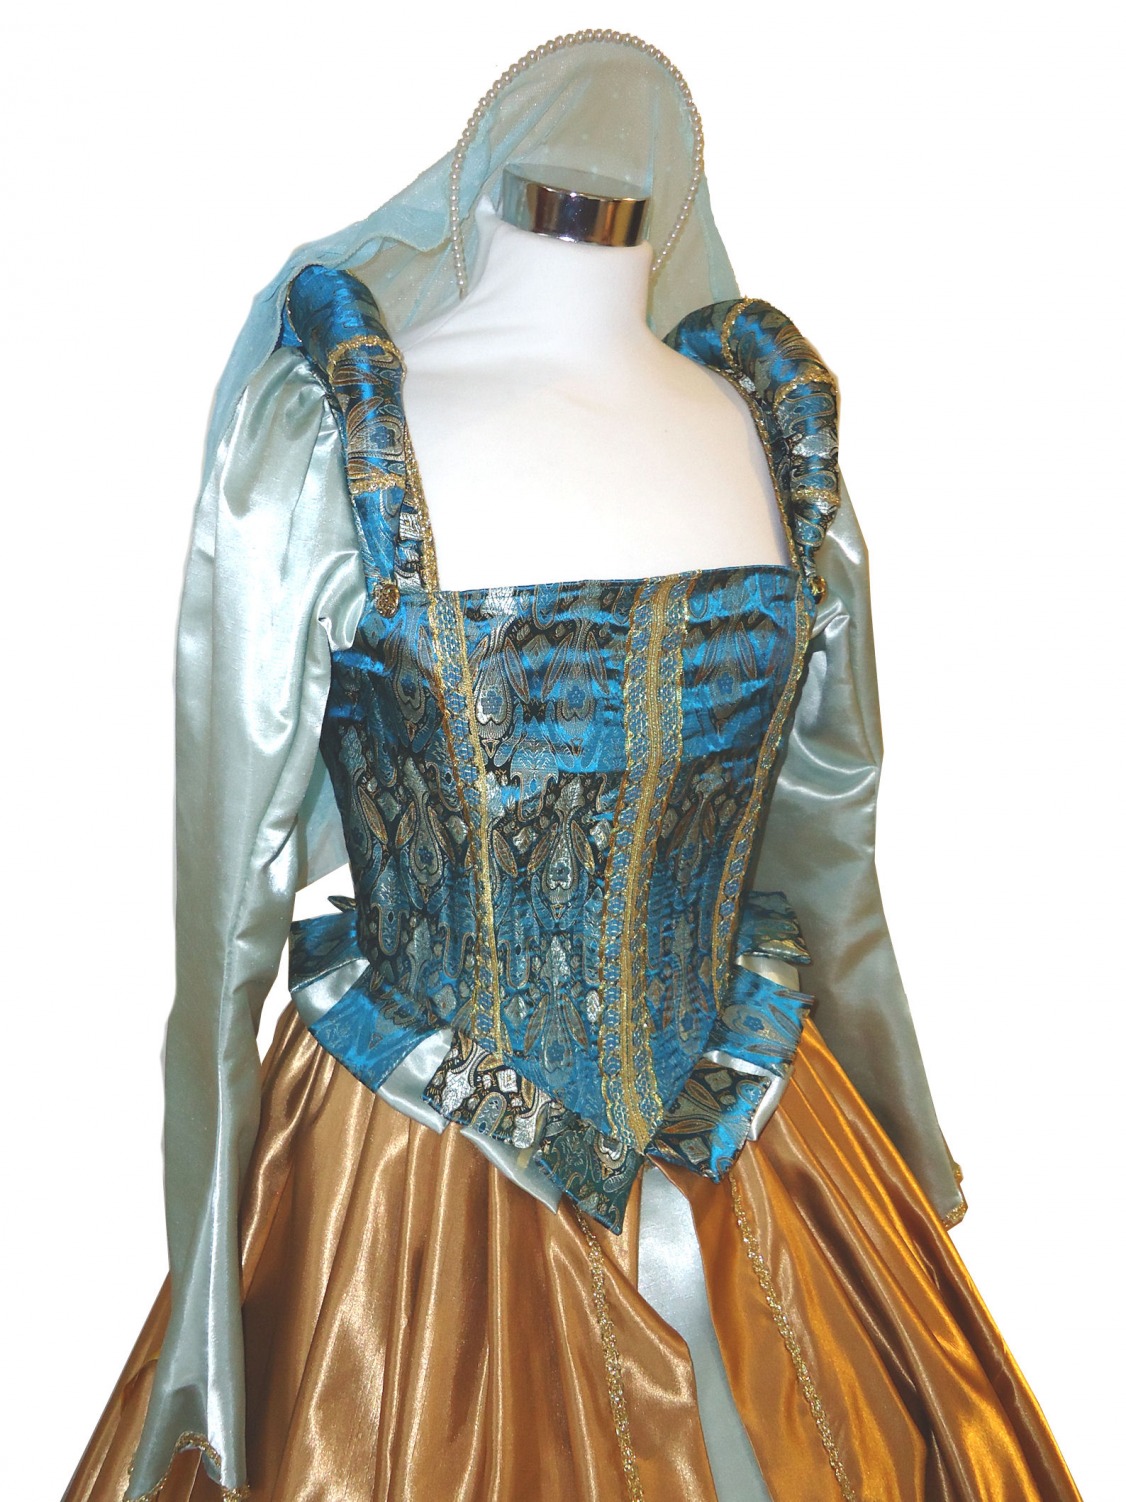 Ladies Deluxe Medieval Tudor Costume and Headdress Size 8 - 10 Image